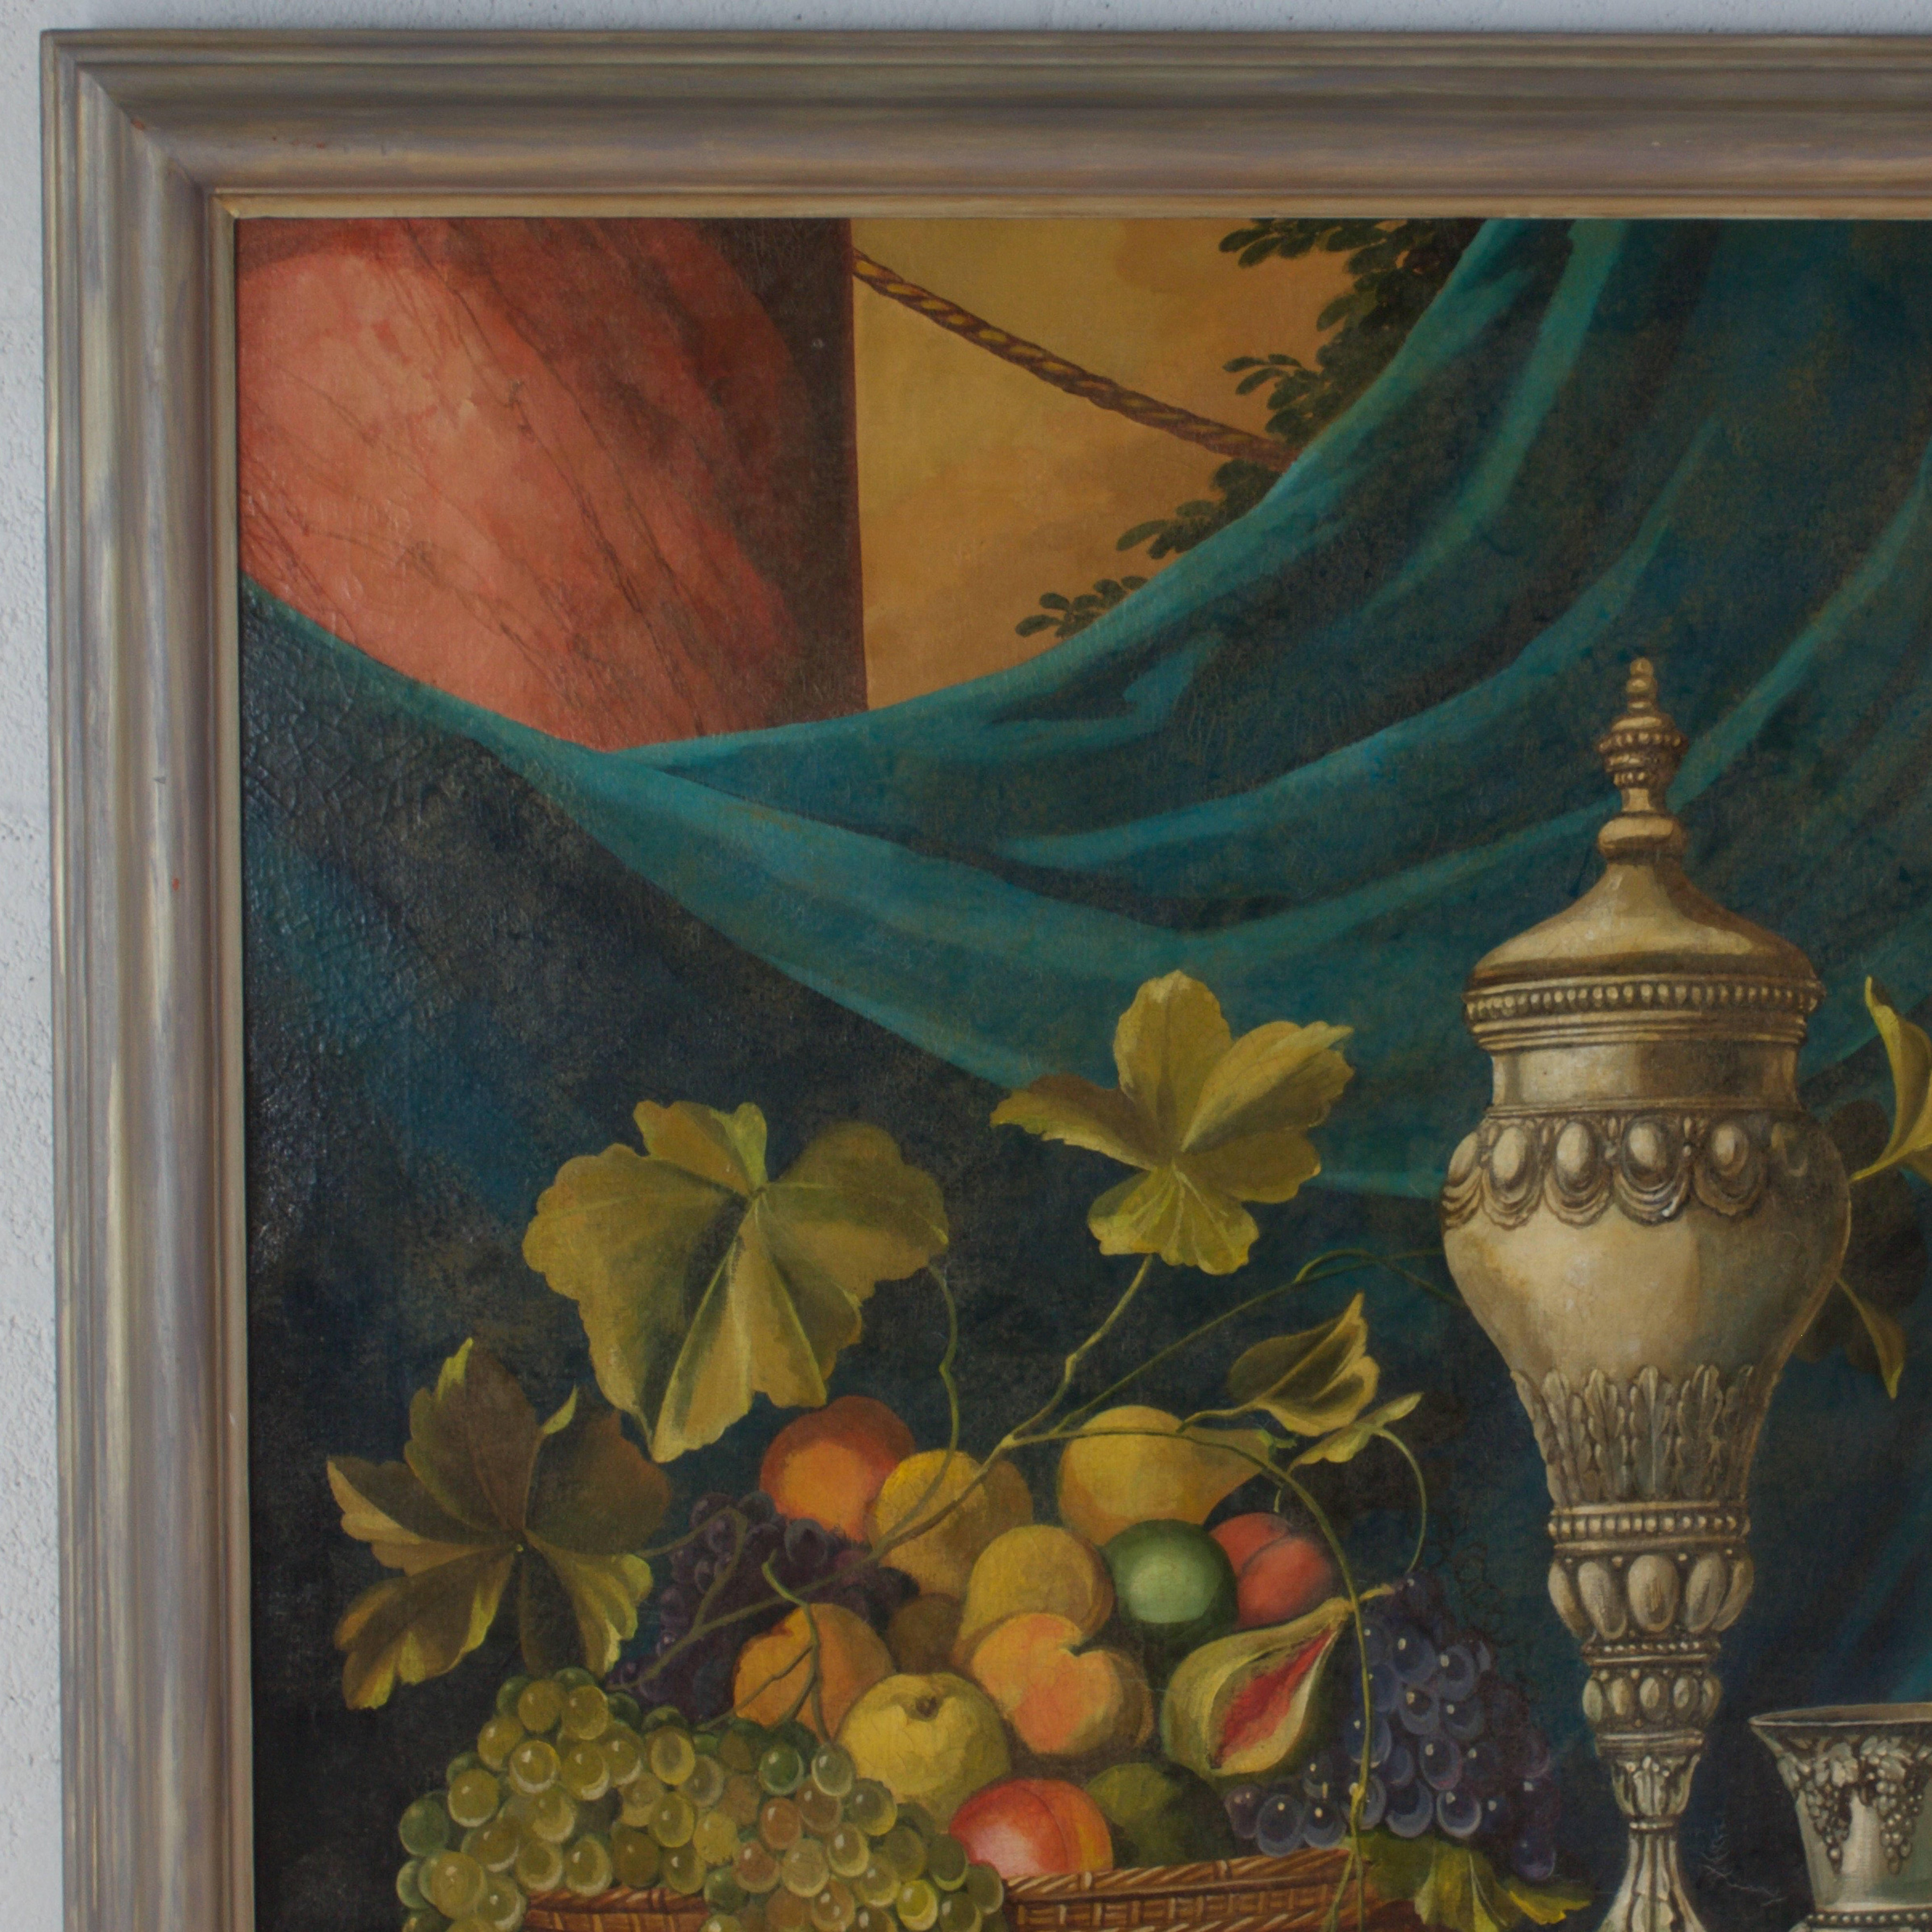 American Still Life Oil on Canvas Painting by William Skilling 